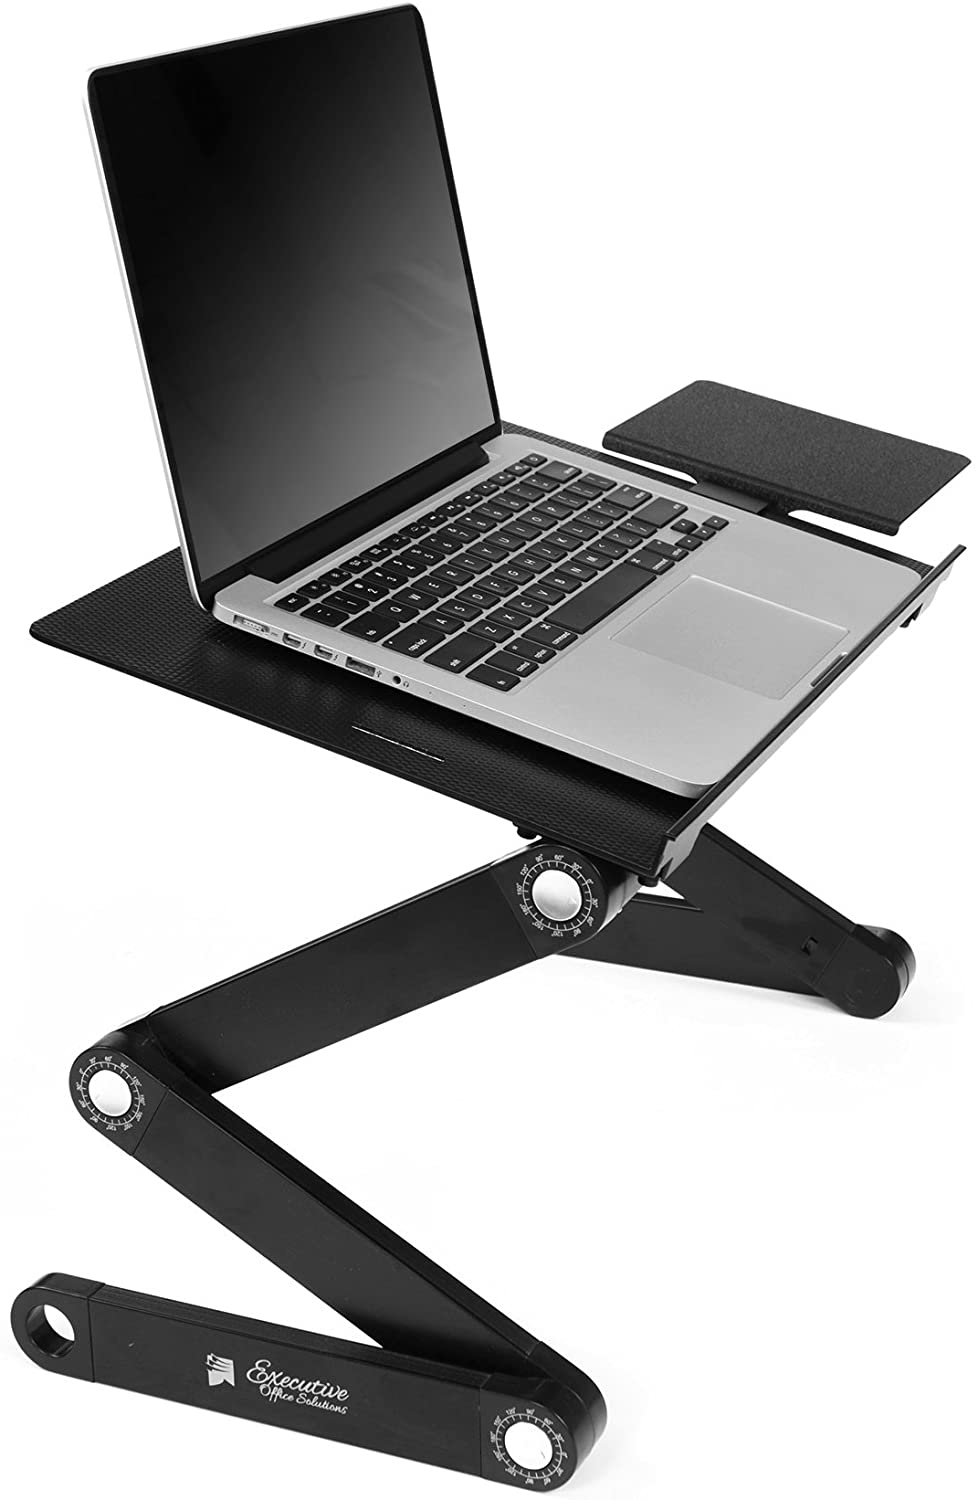 Dell Macbook Pro HP Silver Portable Lightweight Aluminum Laptop Riser for MacBook Air Mercase Portable Laptop Stand,Foldable Adjustable Cooling Desktop Laptop Holder Lenovo More Up to 15.6 inch 